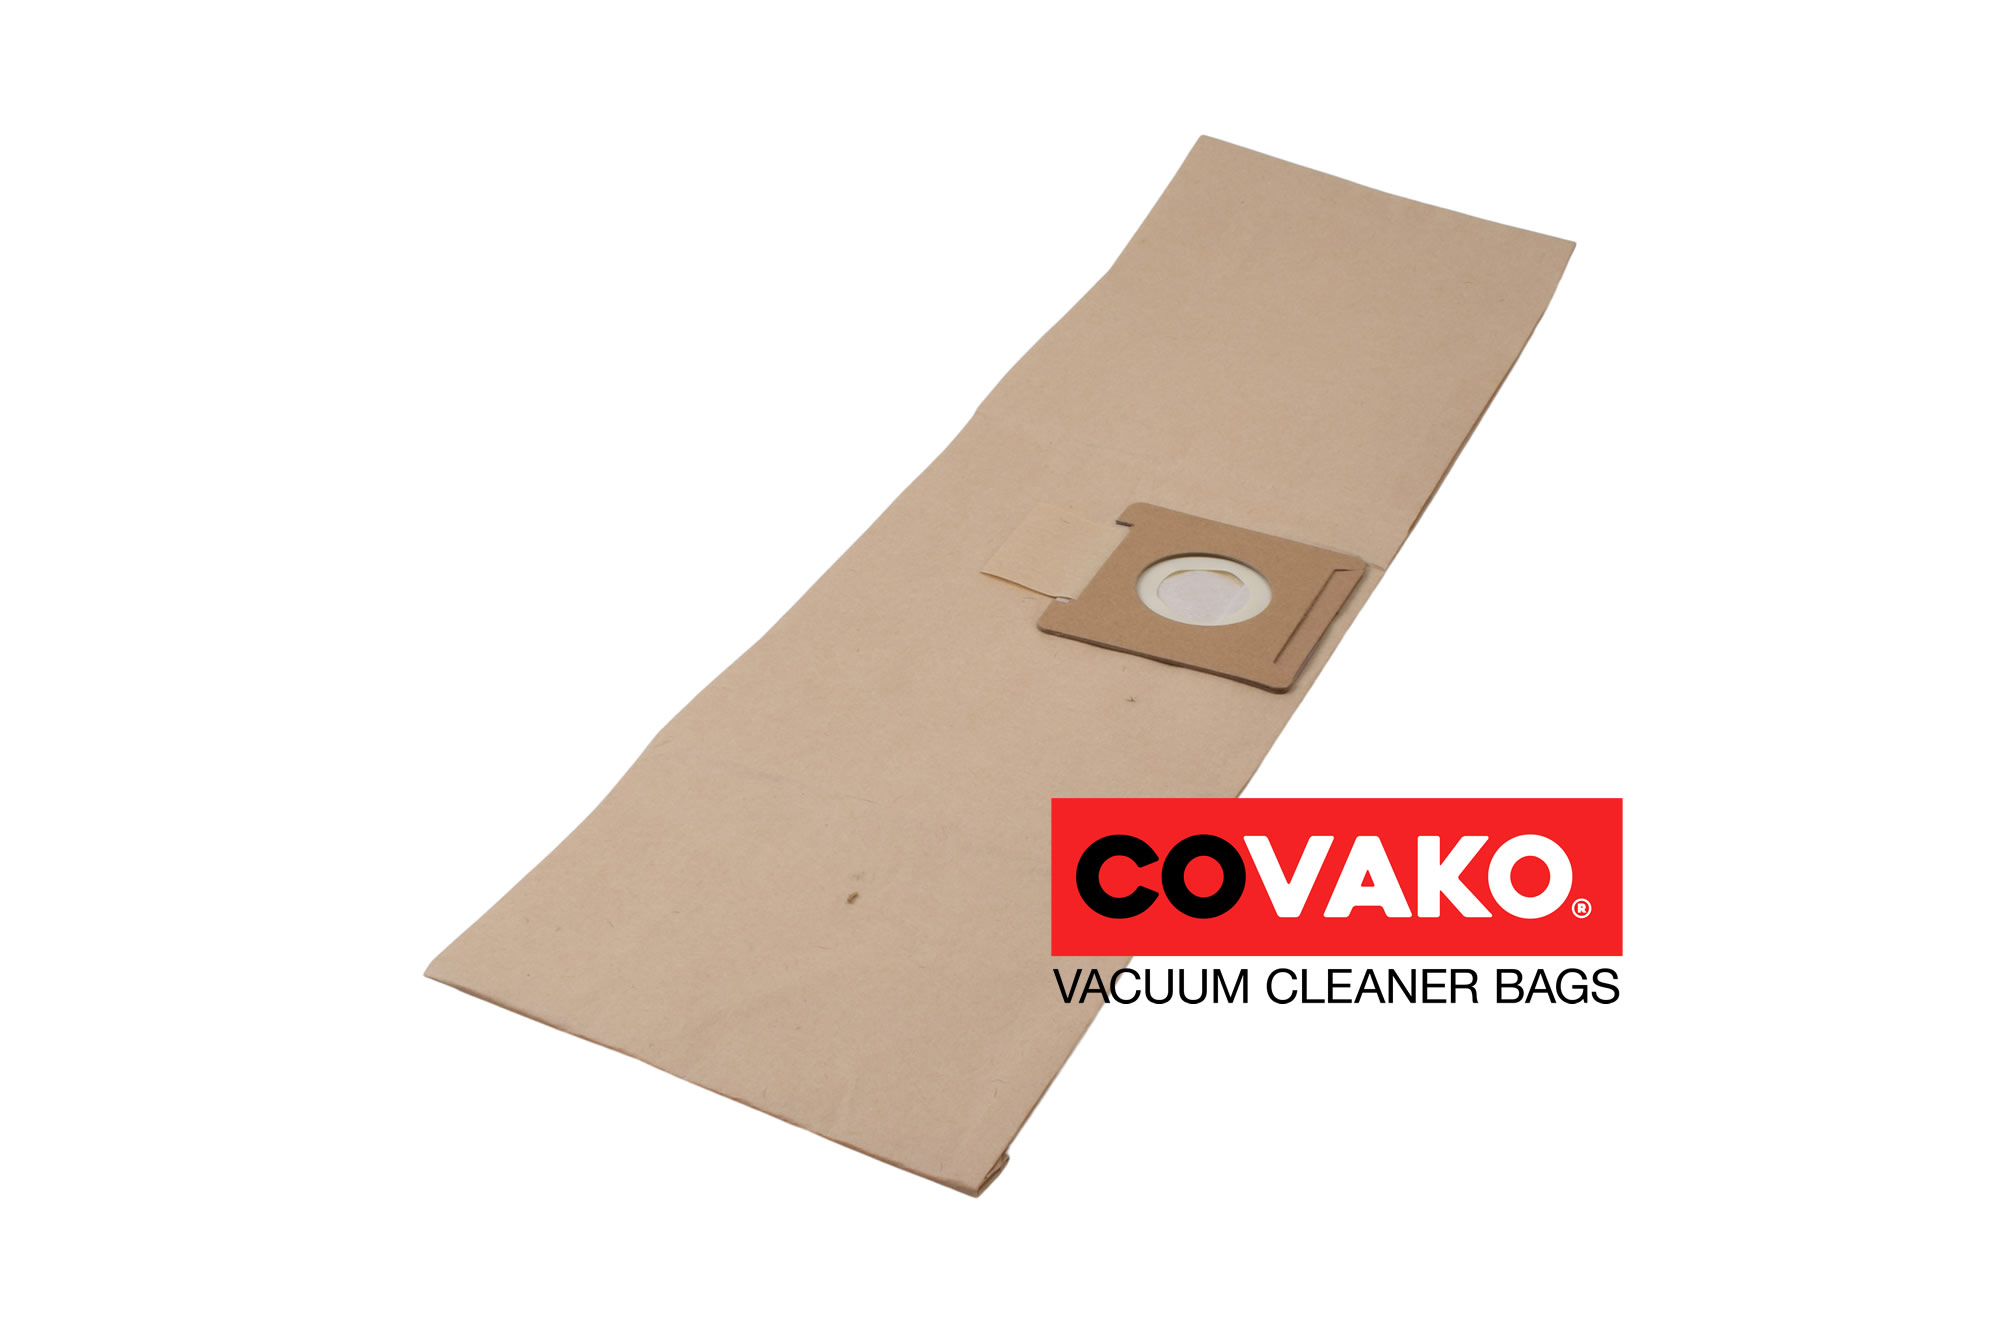 Gansow YP 1400/6 / Paper - Gansow vacuum cleaner bags